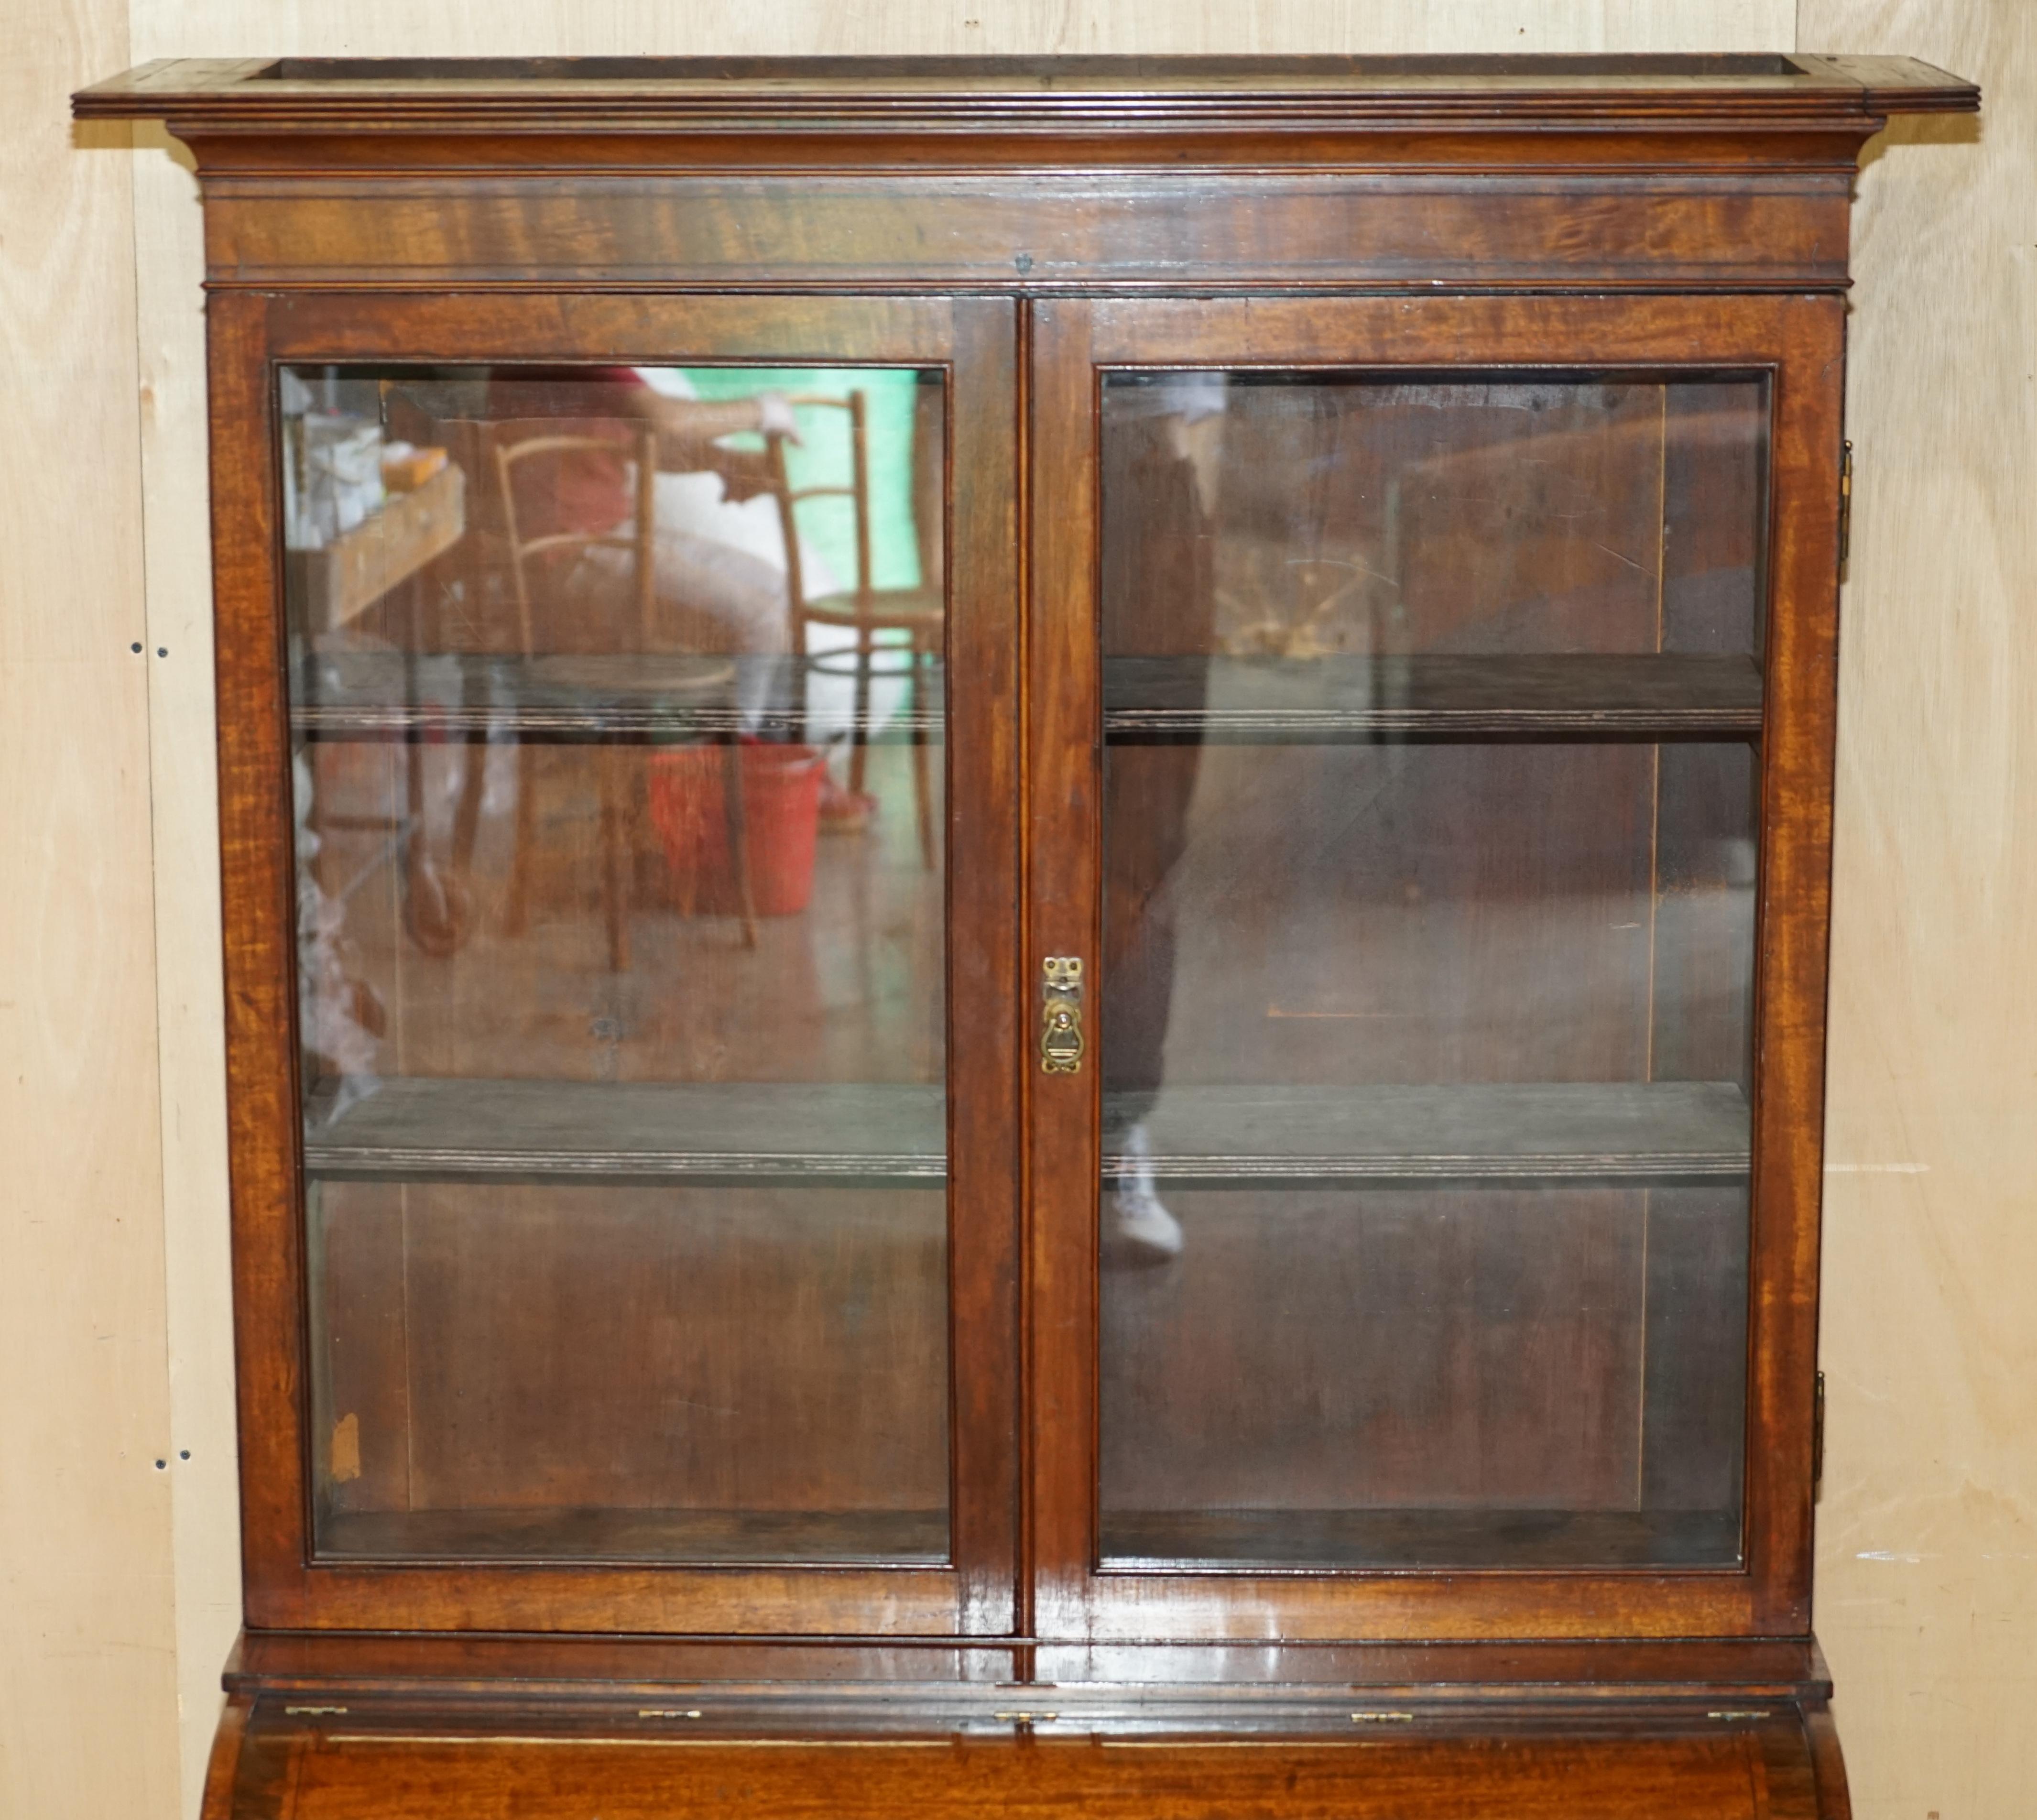 High Victorian ANTIQUE ViCTORIAN 1860 WALNUT SCRIBAN BUREAU BOOKCASE MUST SEE PICTURES For Sale